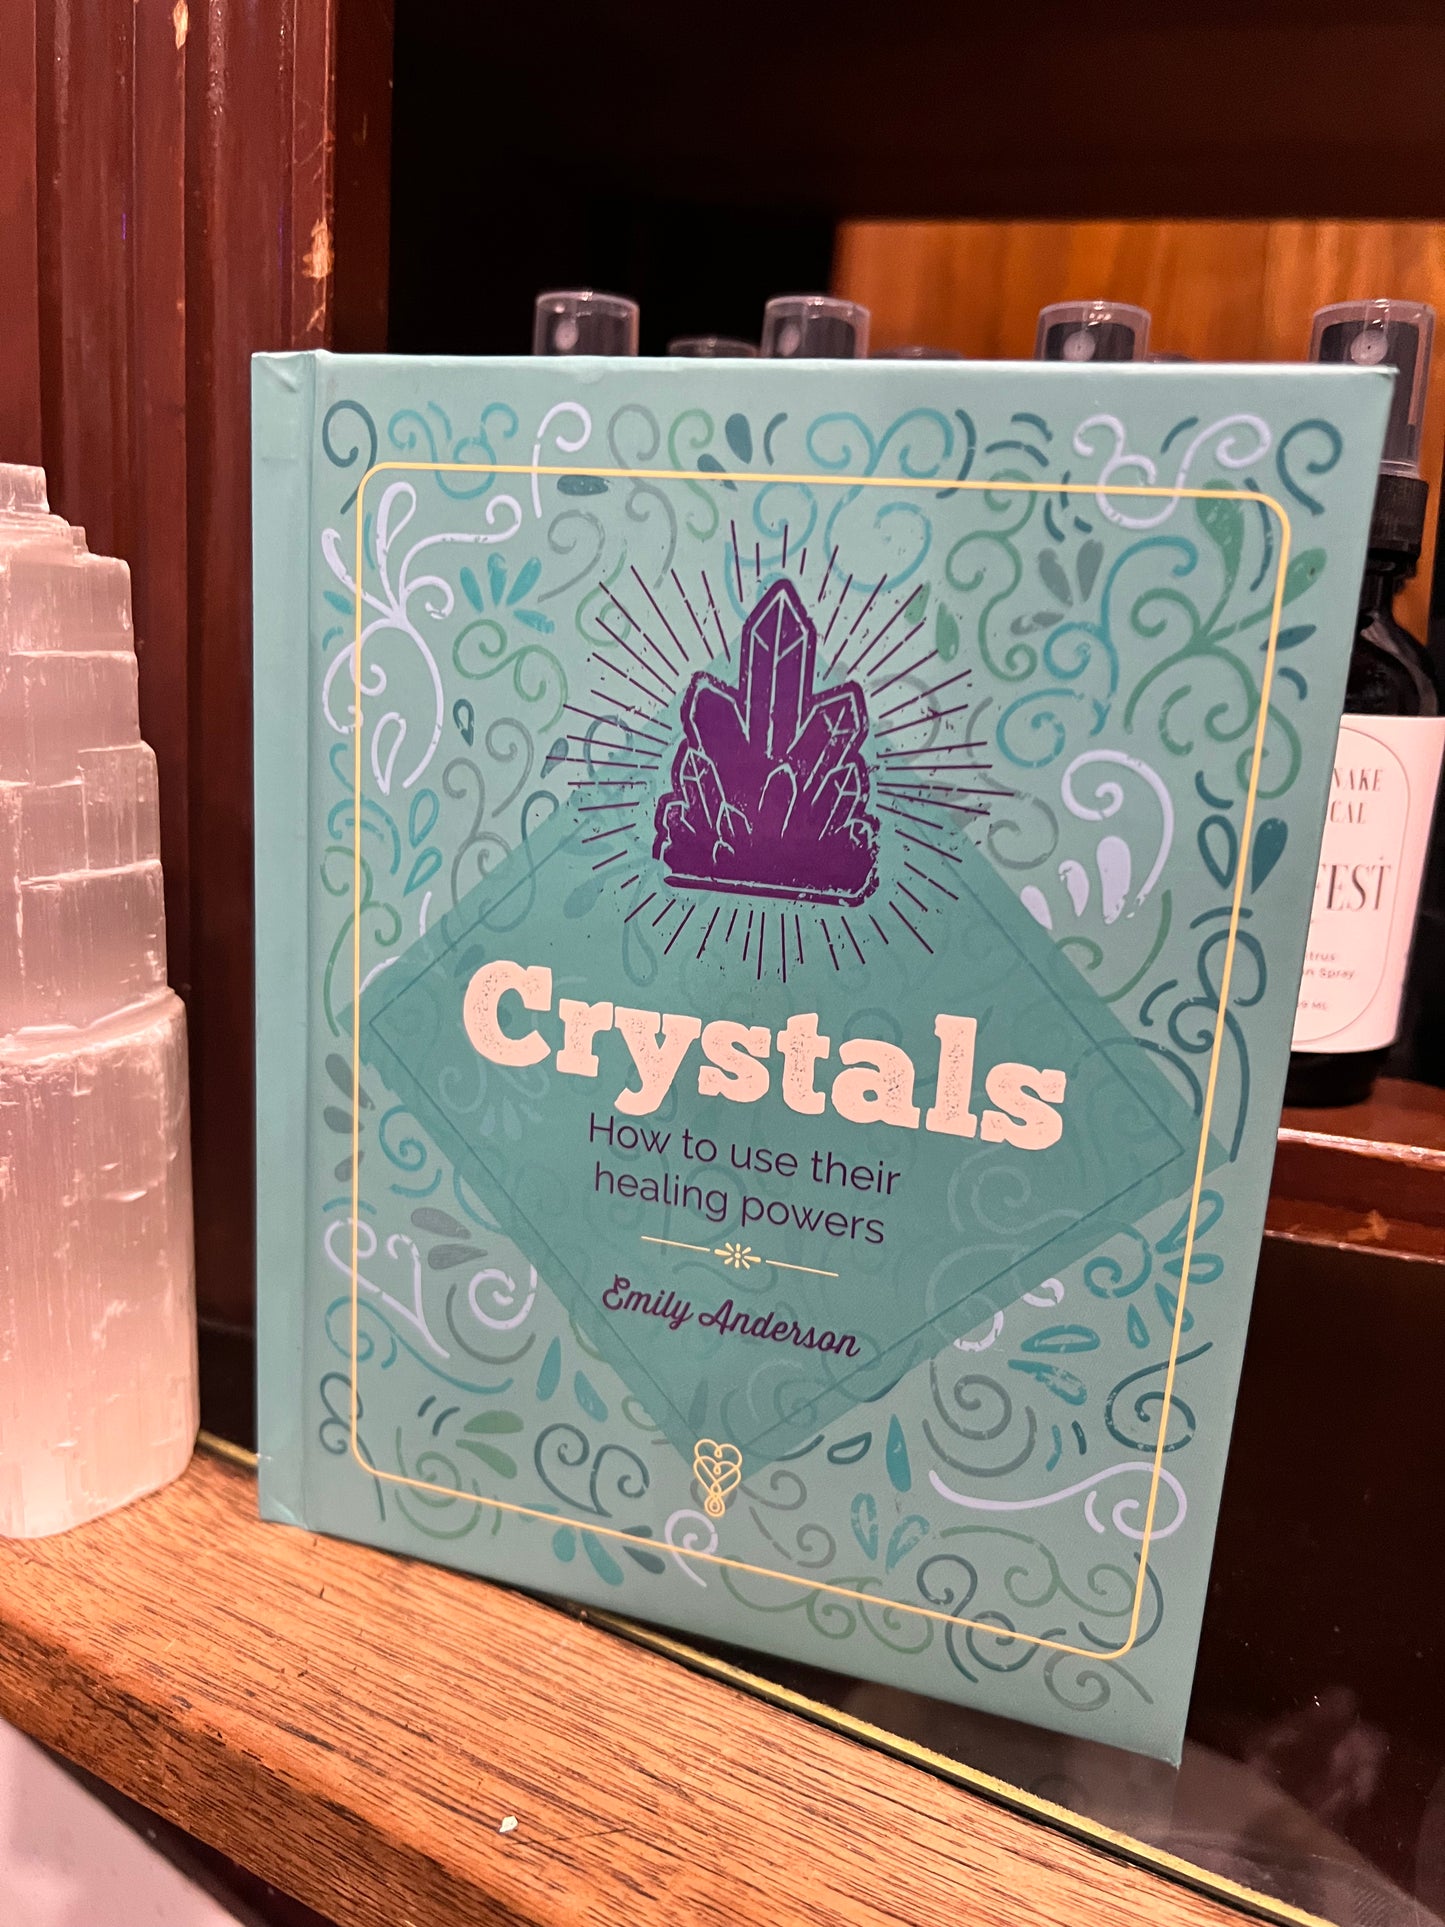 Crystals - How to use their healing powers by Emily Anderson